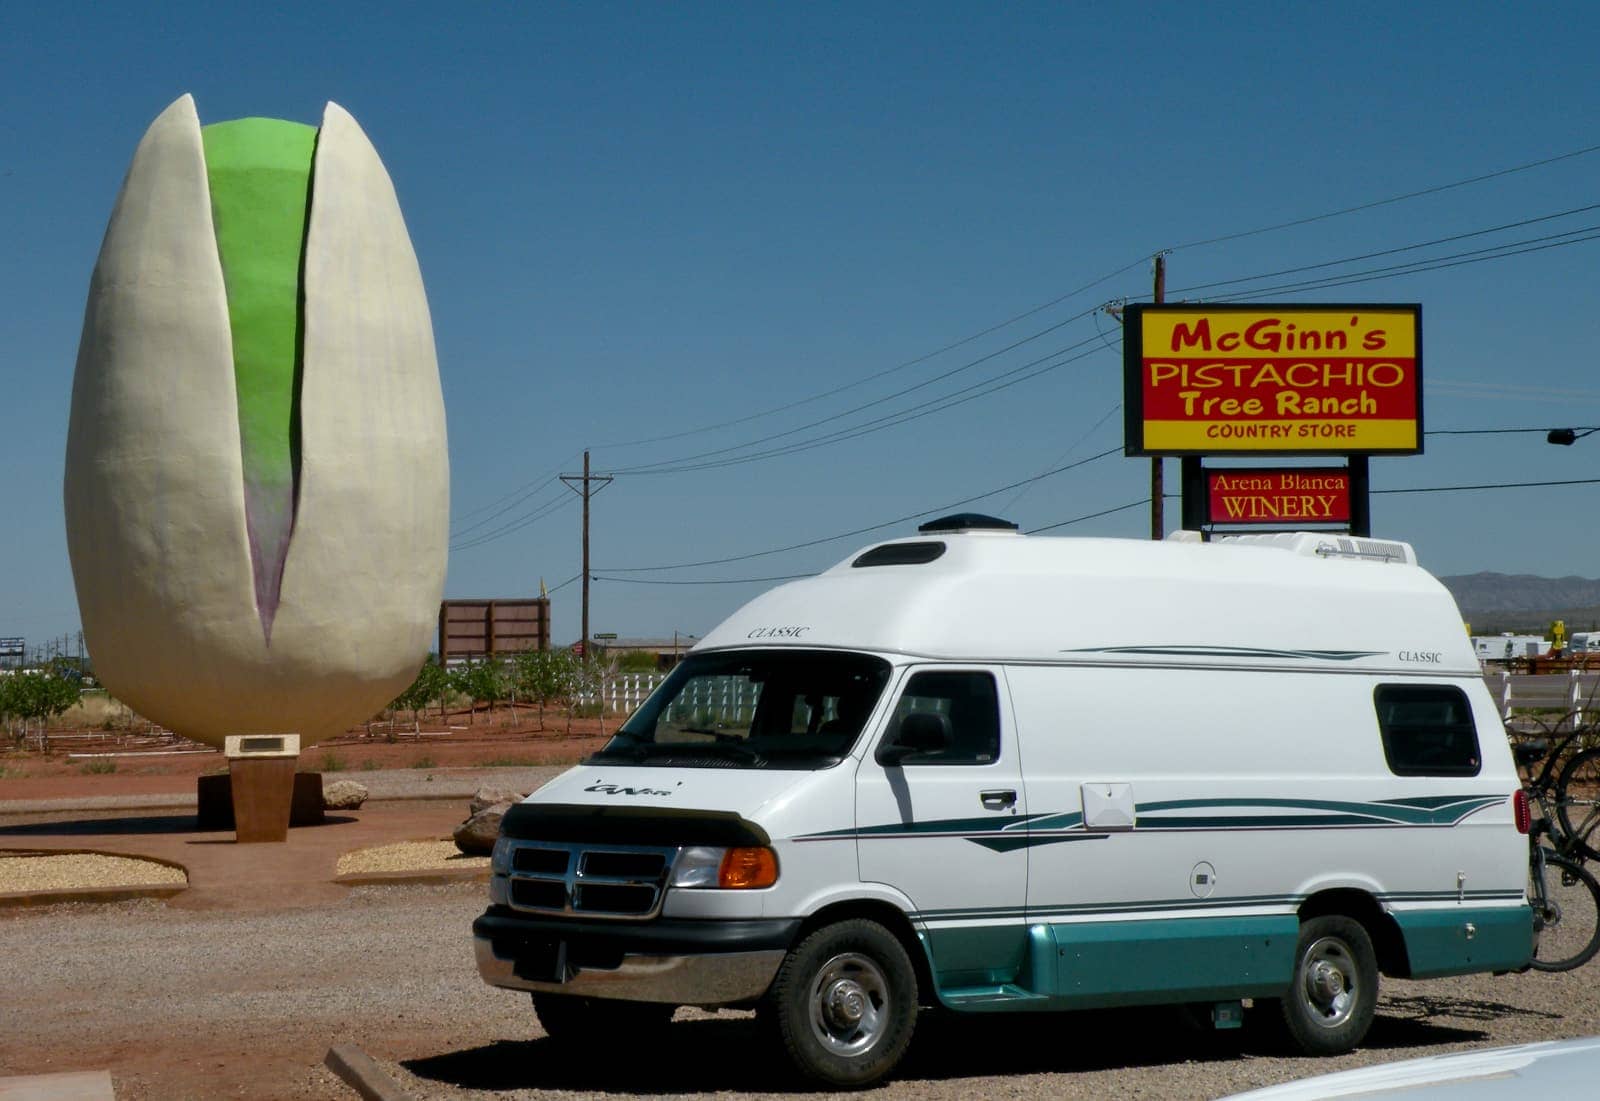 White camper van with giant pistachio in background